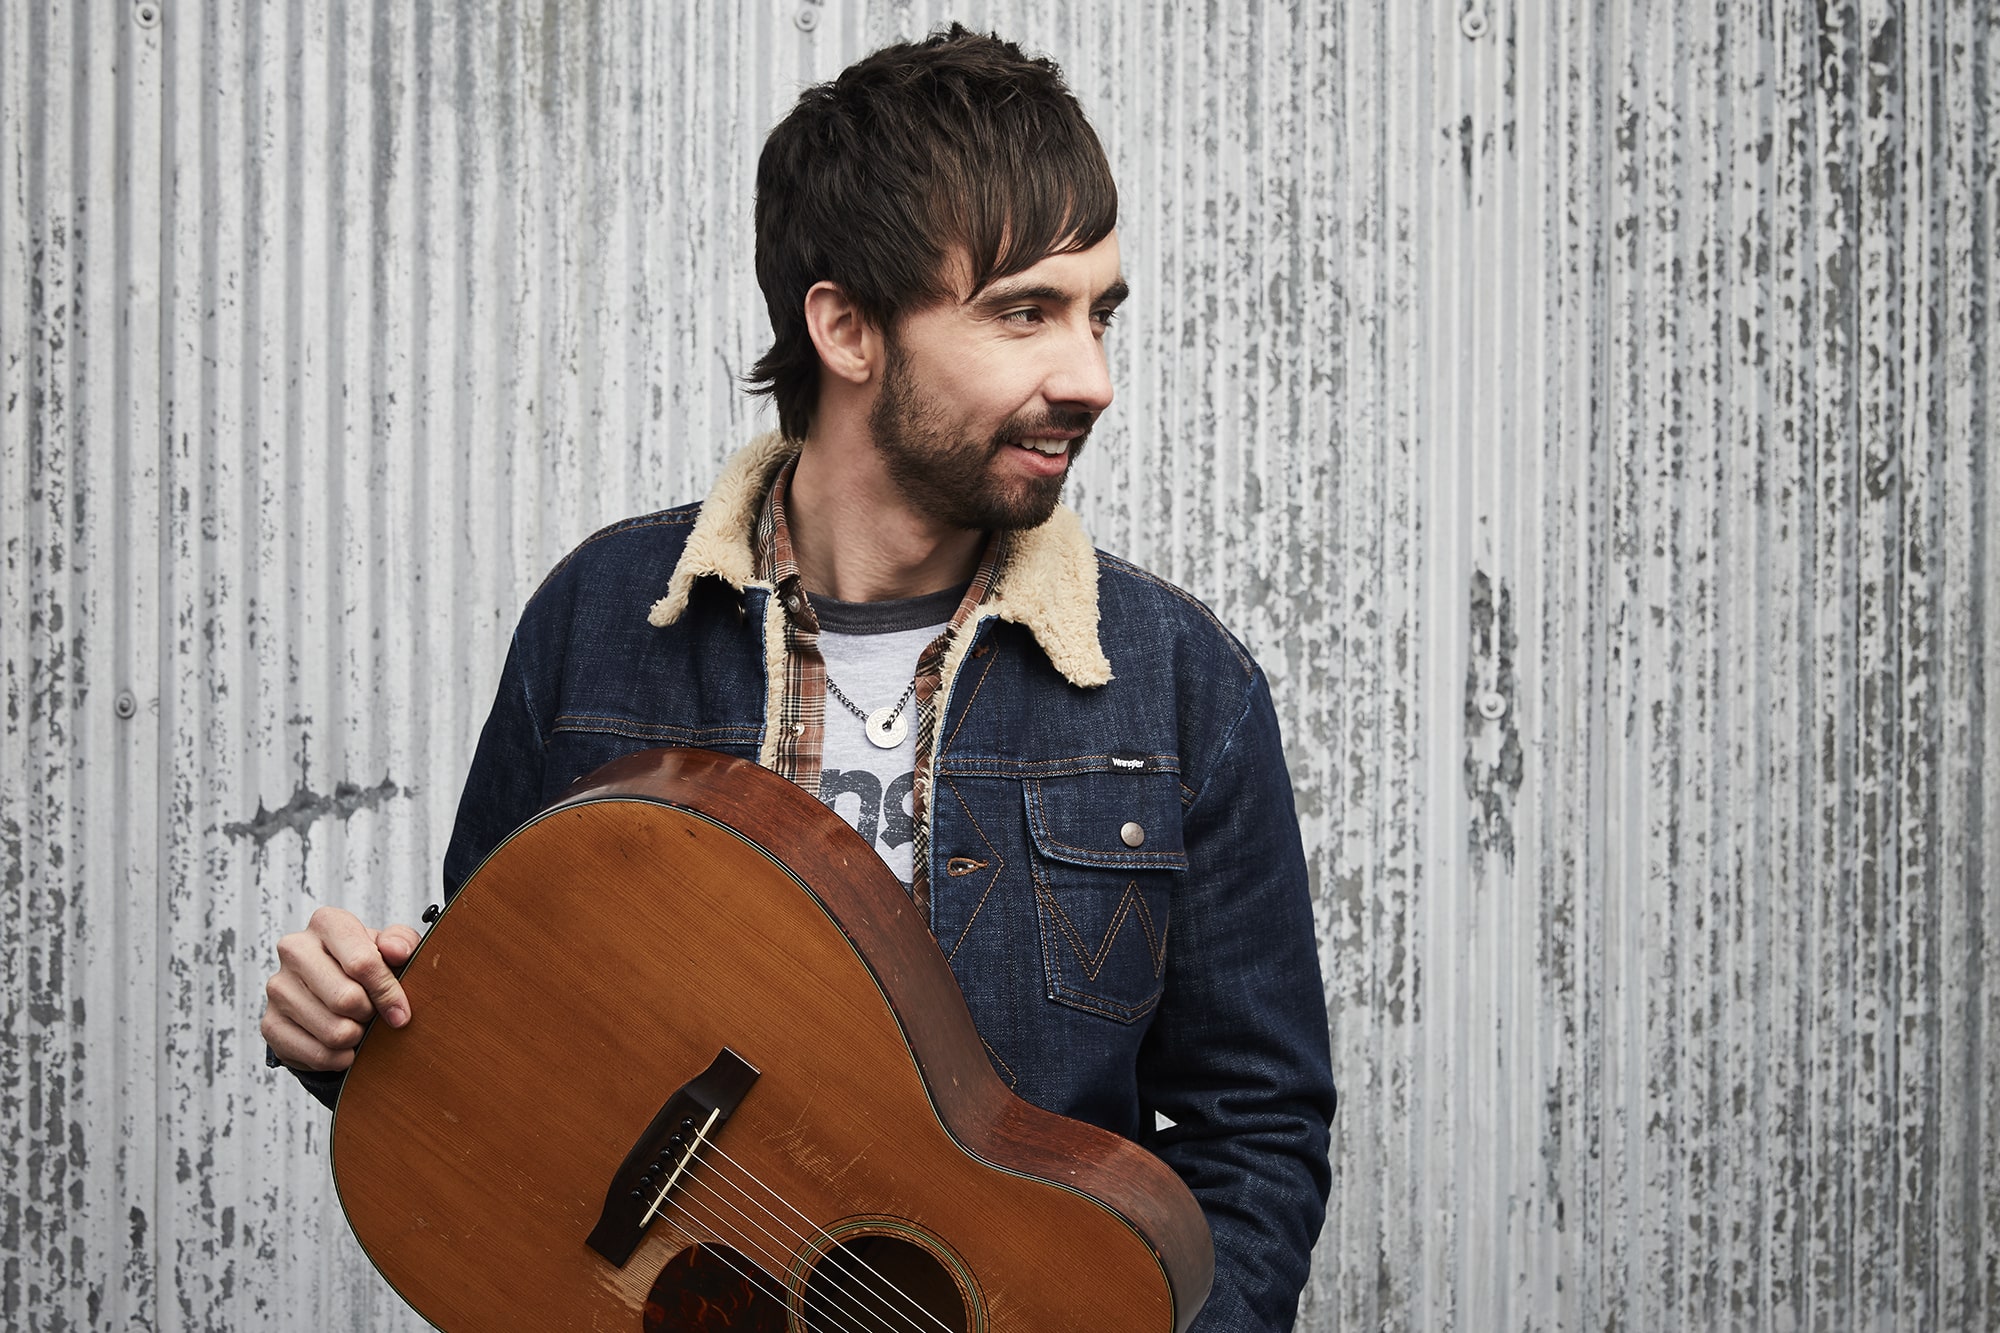 Mo Pitney’s Affable Country Music Recalls a Kinder, Gentler America